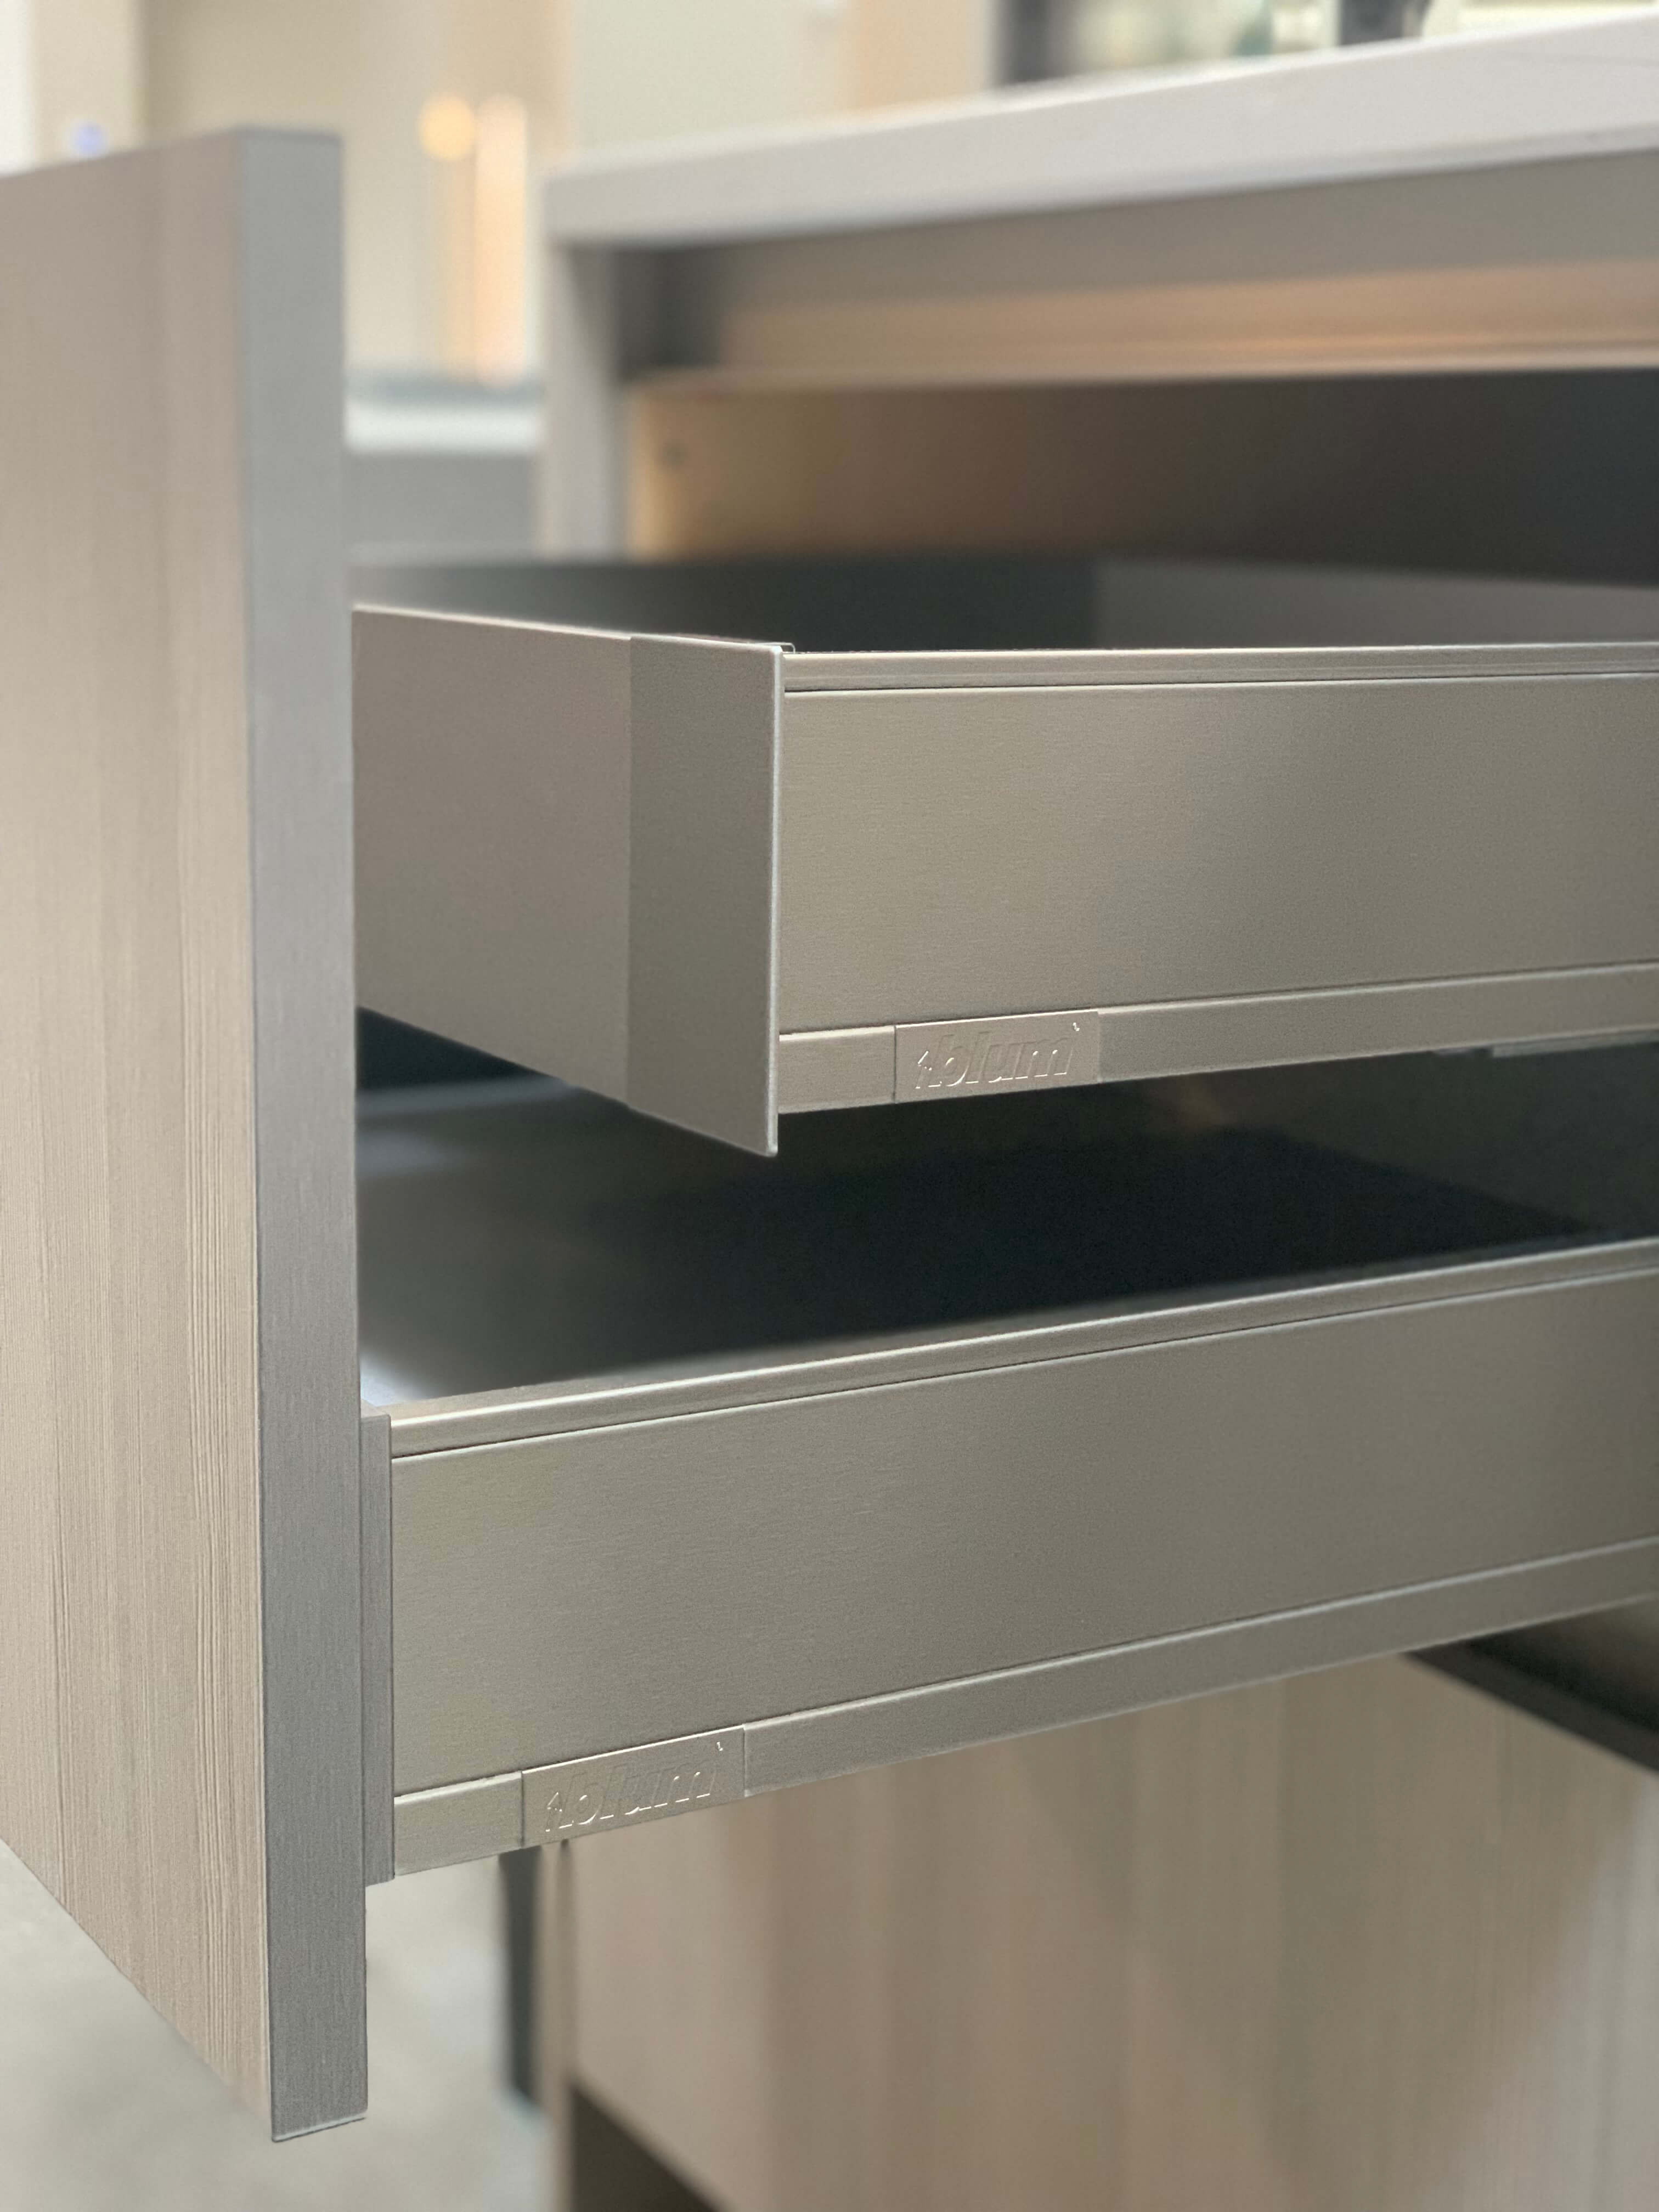 Legrabox steel drawers add space, durability and extend the life of your cabinetry. See here on display at Beck/Allen Cabinetry in St. Louis, MO.